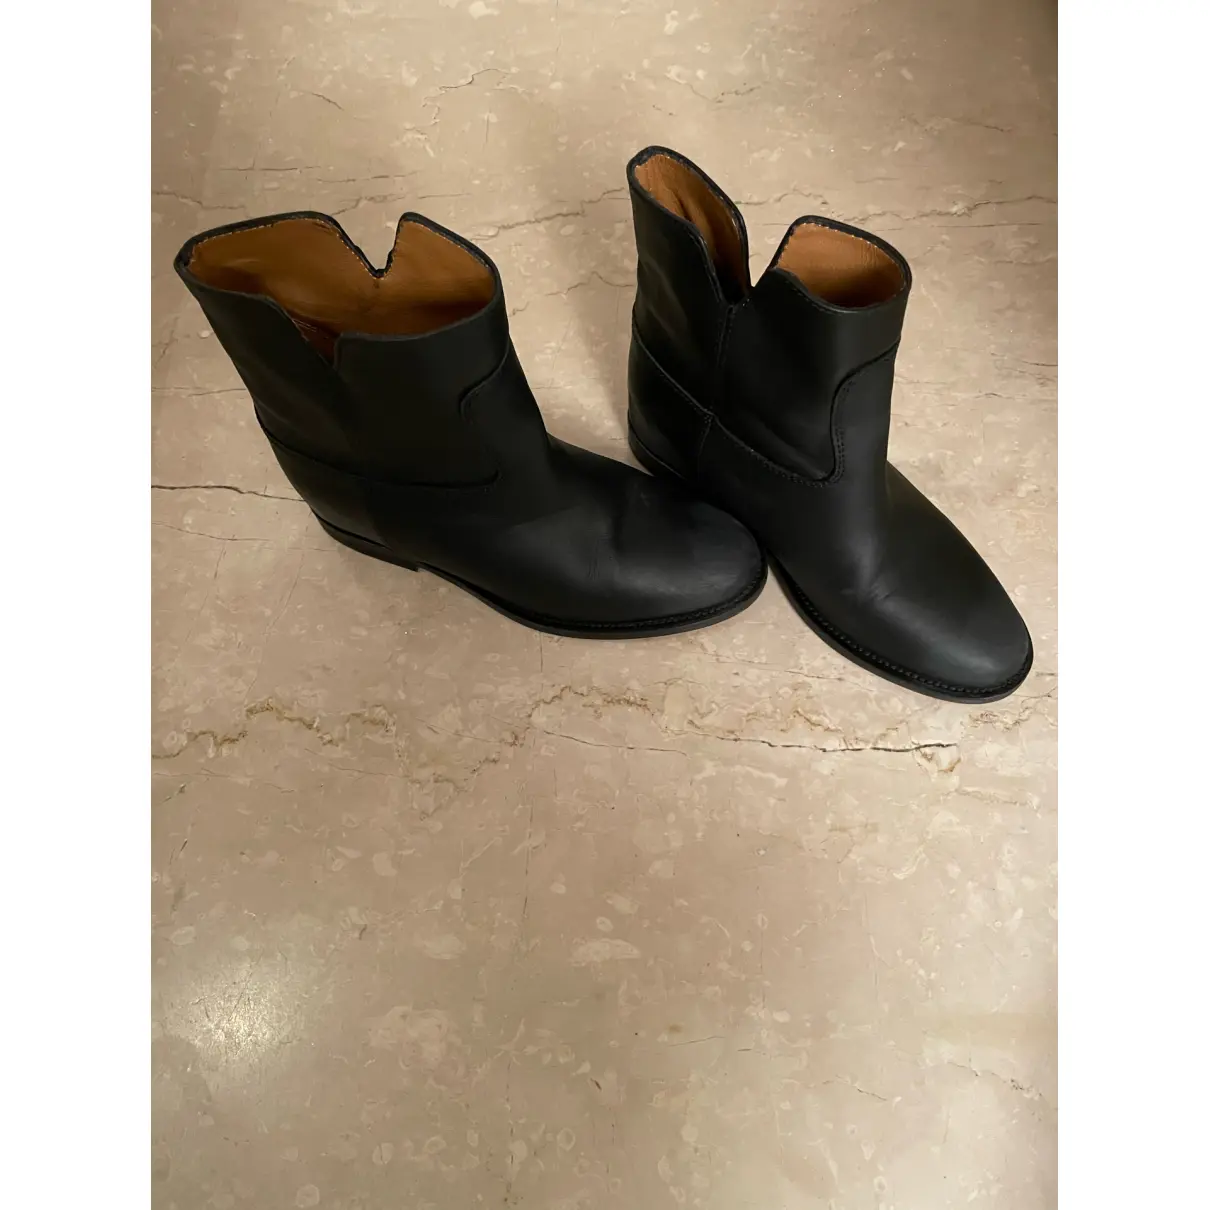 Buy Via Roma xv Leather ankle boots online